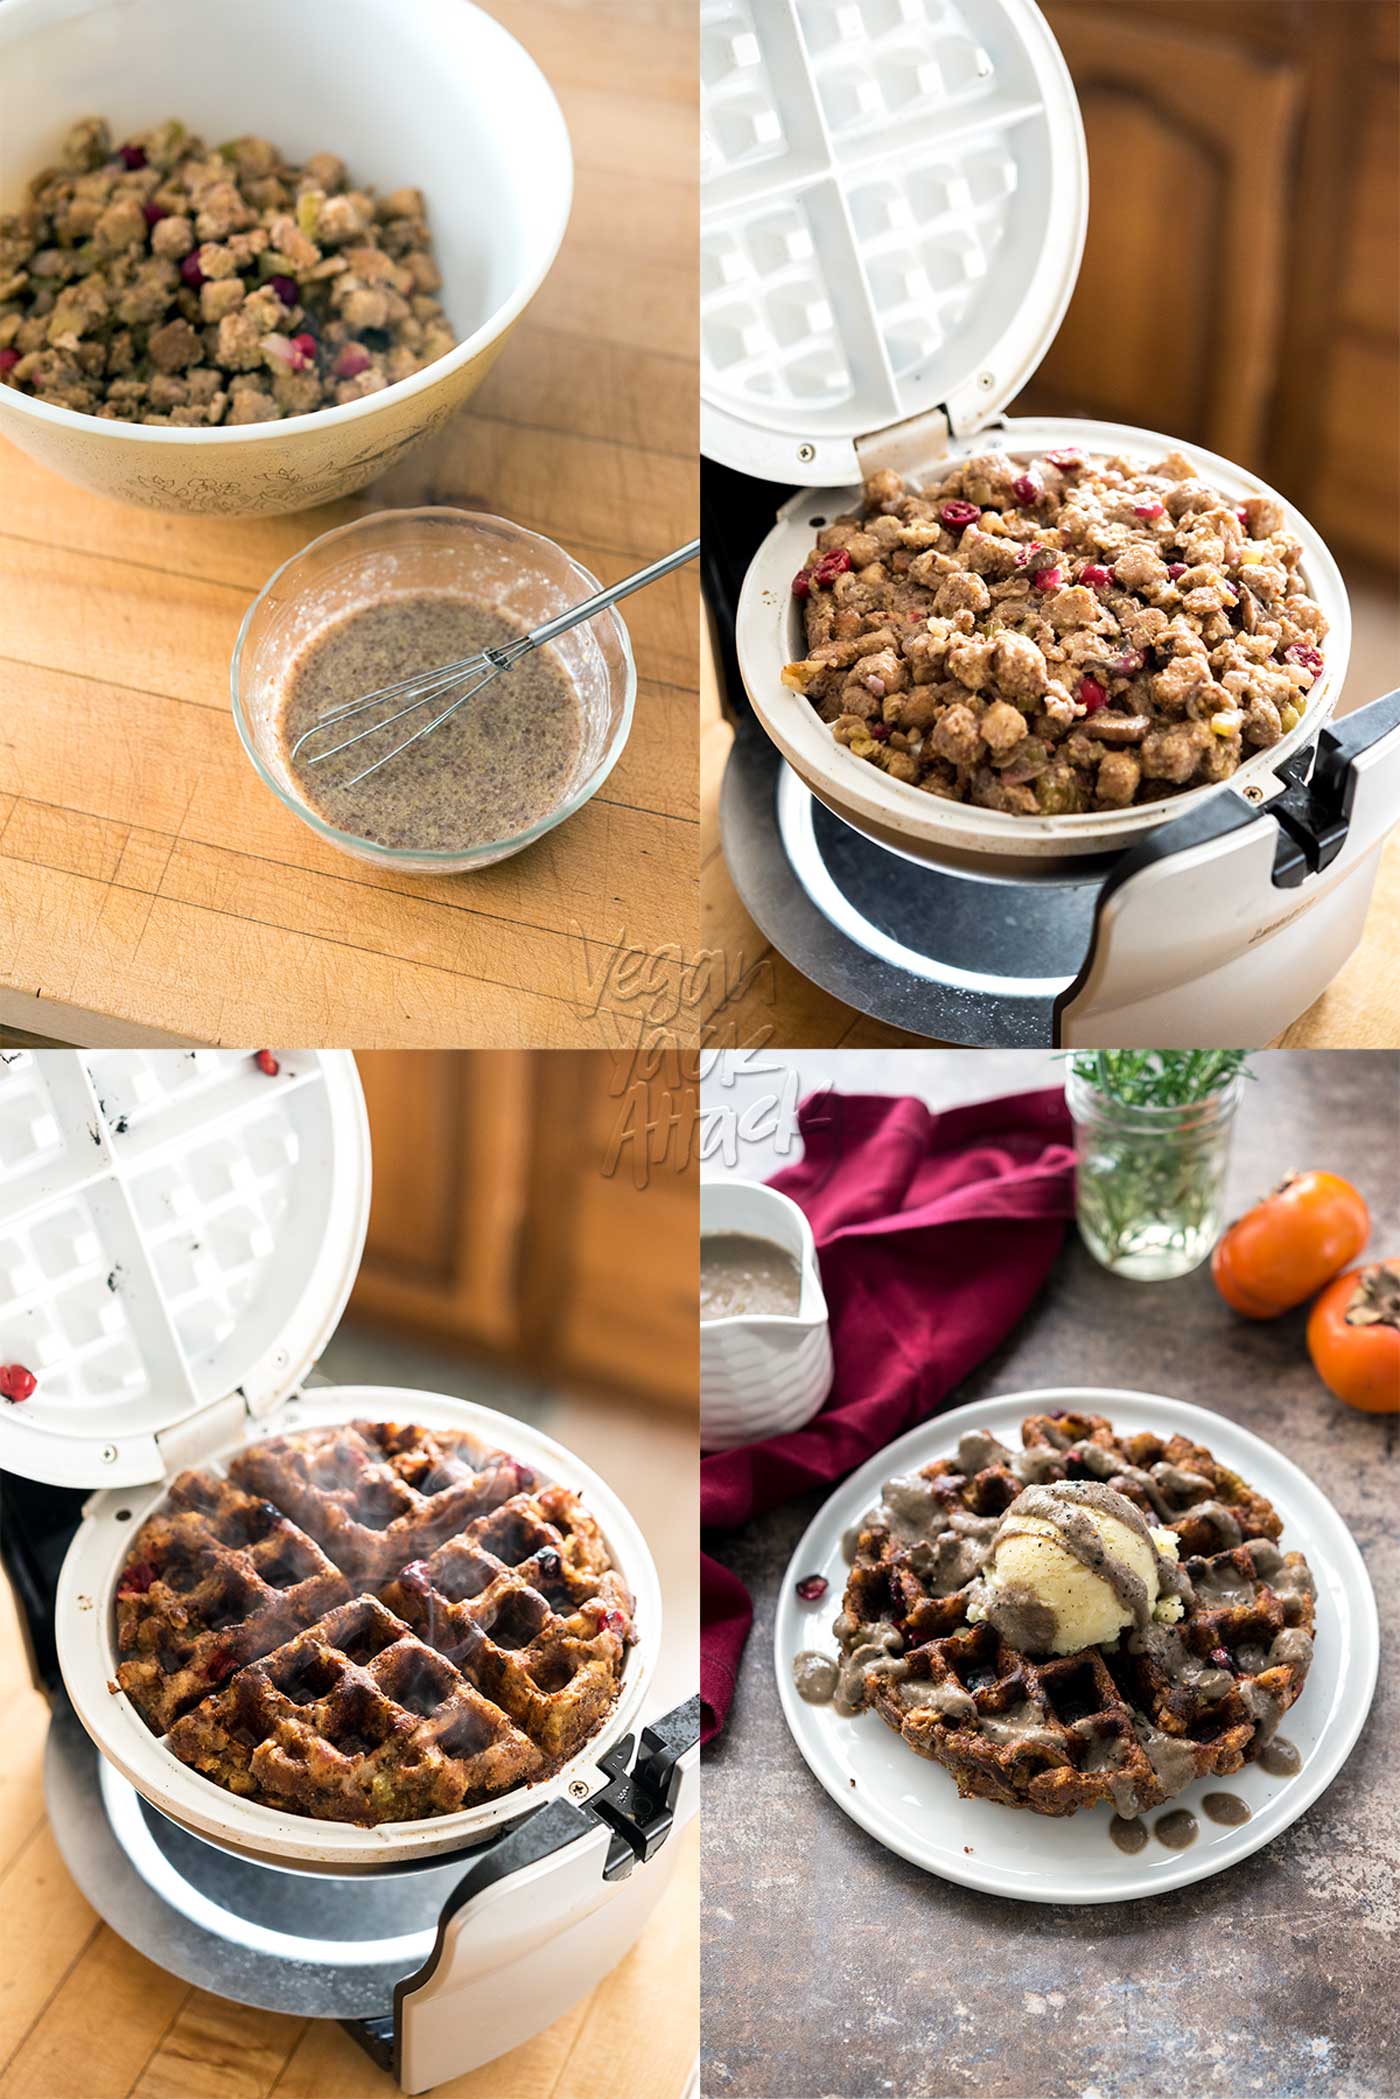 Looking for Thanksgiving Leftover Recipe Ideas? I've got you covered with these delicious dishes ranging from simple to fully-transformed! #Vegan